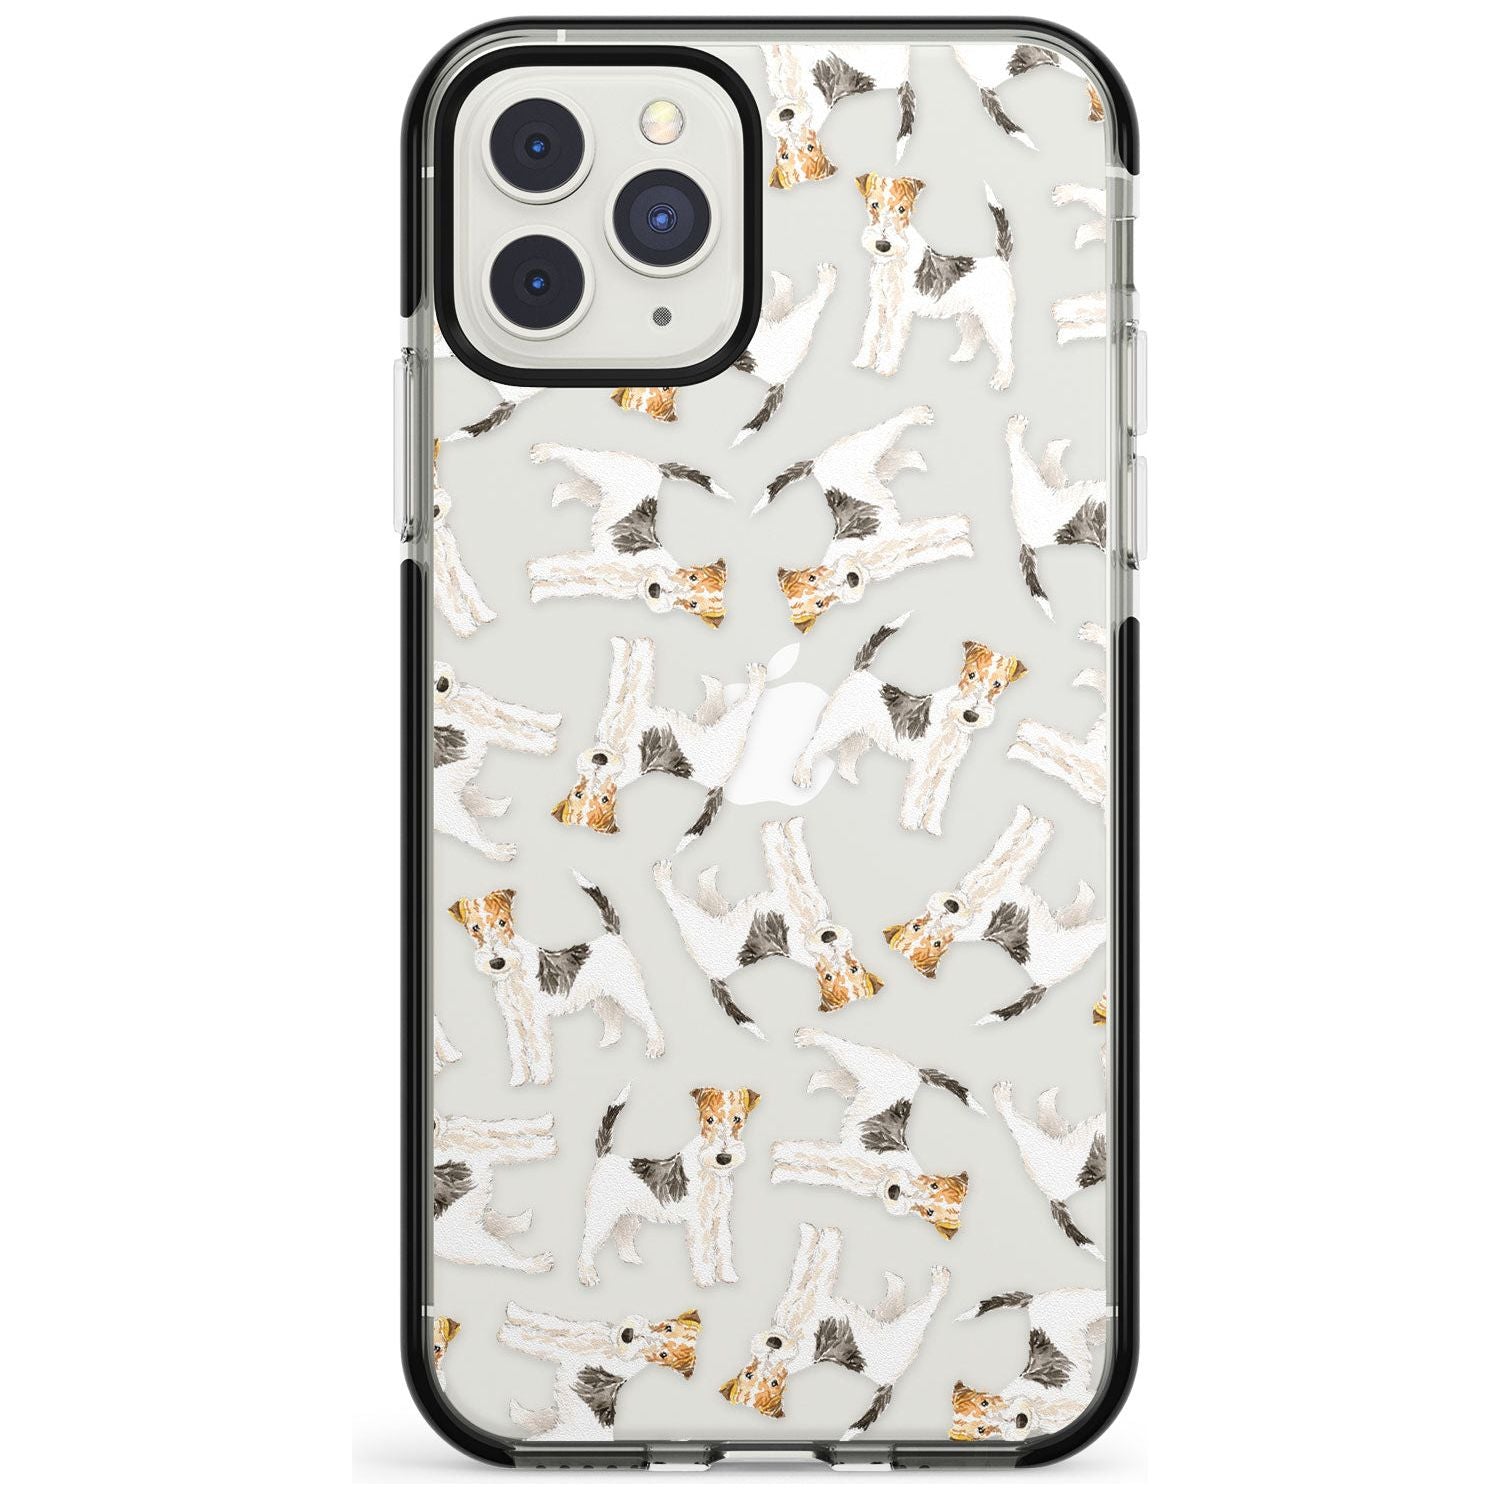 Wire Haired Fox Terrier Watercolour Dog Pattern Black Impact Phone Case for iPhone 11 Pro Max